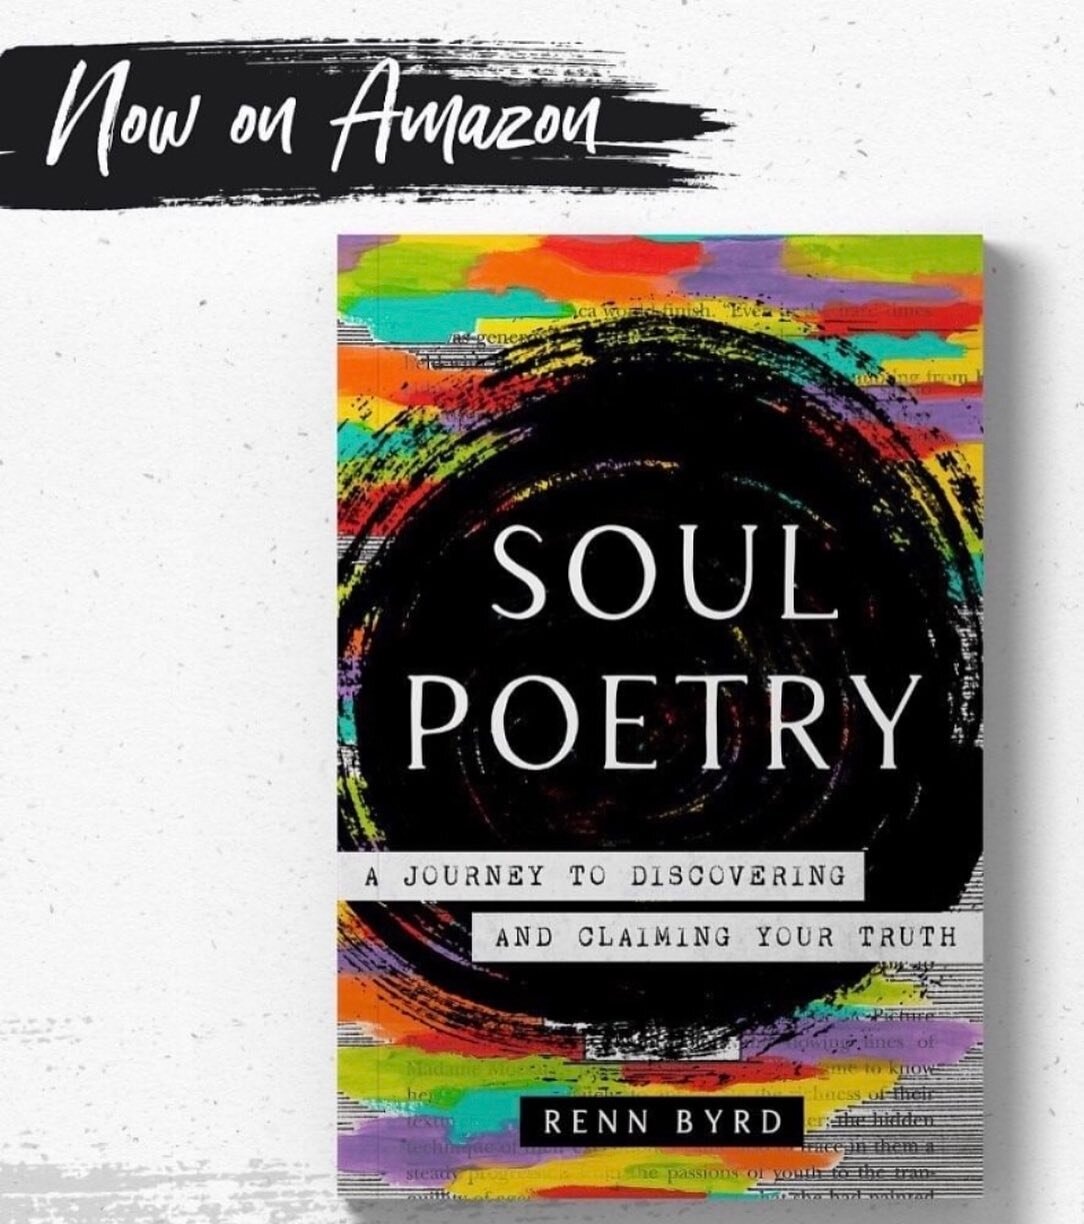 &quot;Soul Poetry: A Journey To Discovering and Claiming Your Truth&quot; 

I invite you to take a raw glimpse into my life and the events that shaped me. This book is about finding the courage to challenge those stories and take responsibility for m